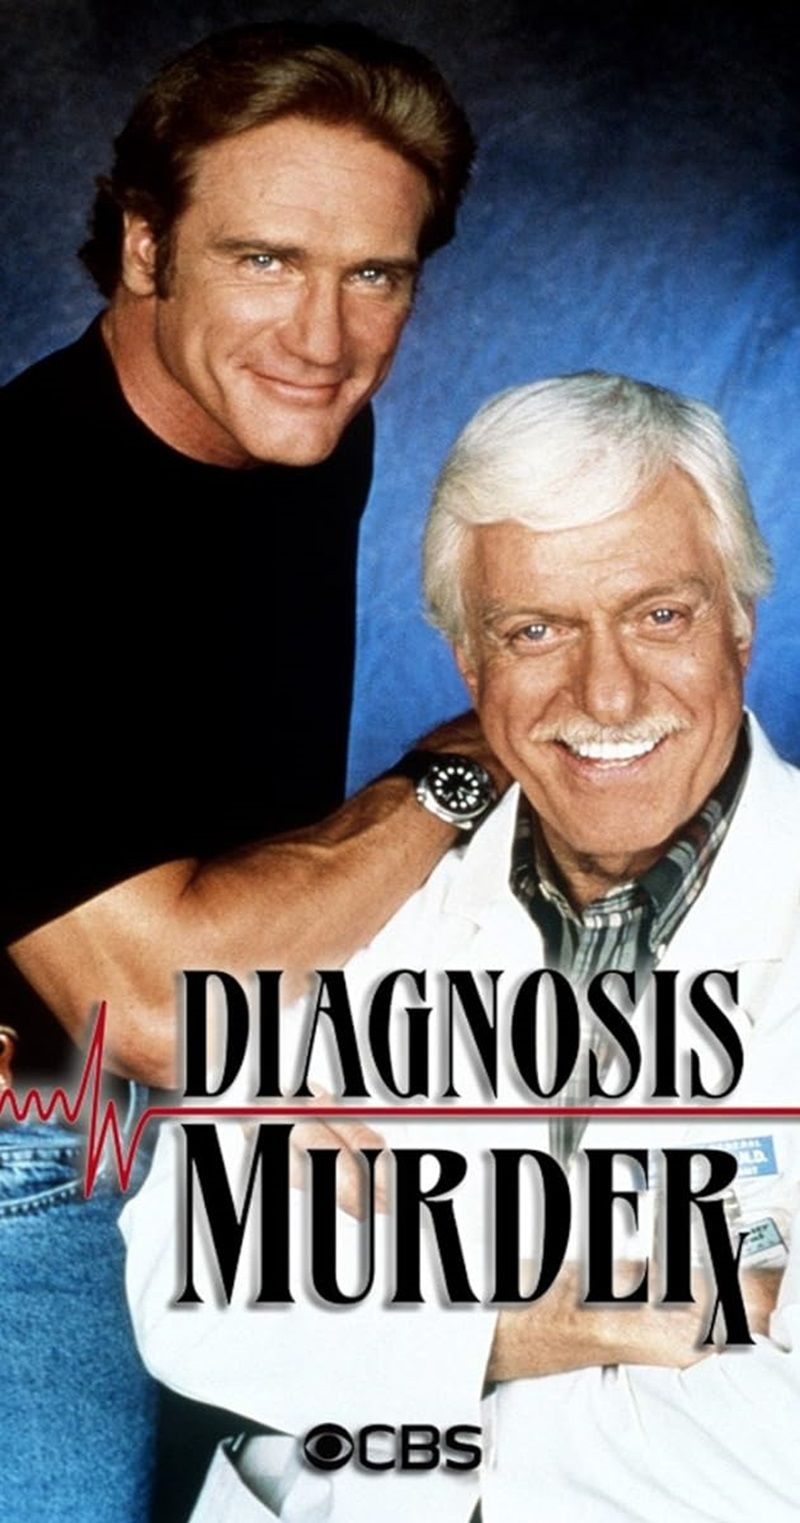 Poster of the TV show 'Diagnosis Murder'